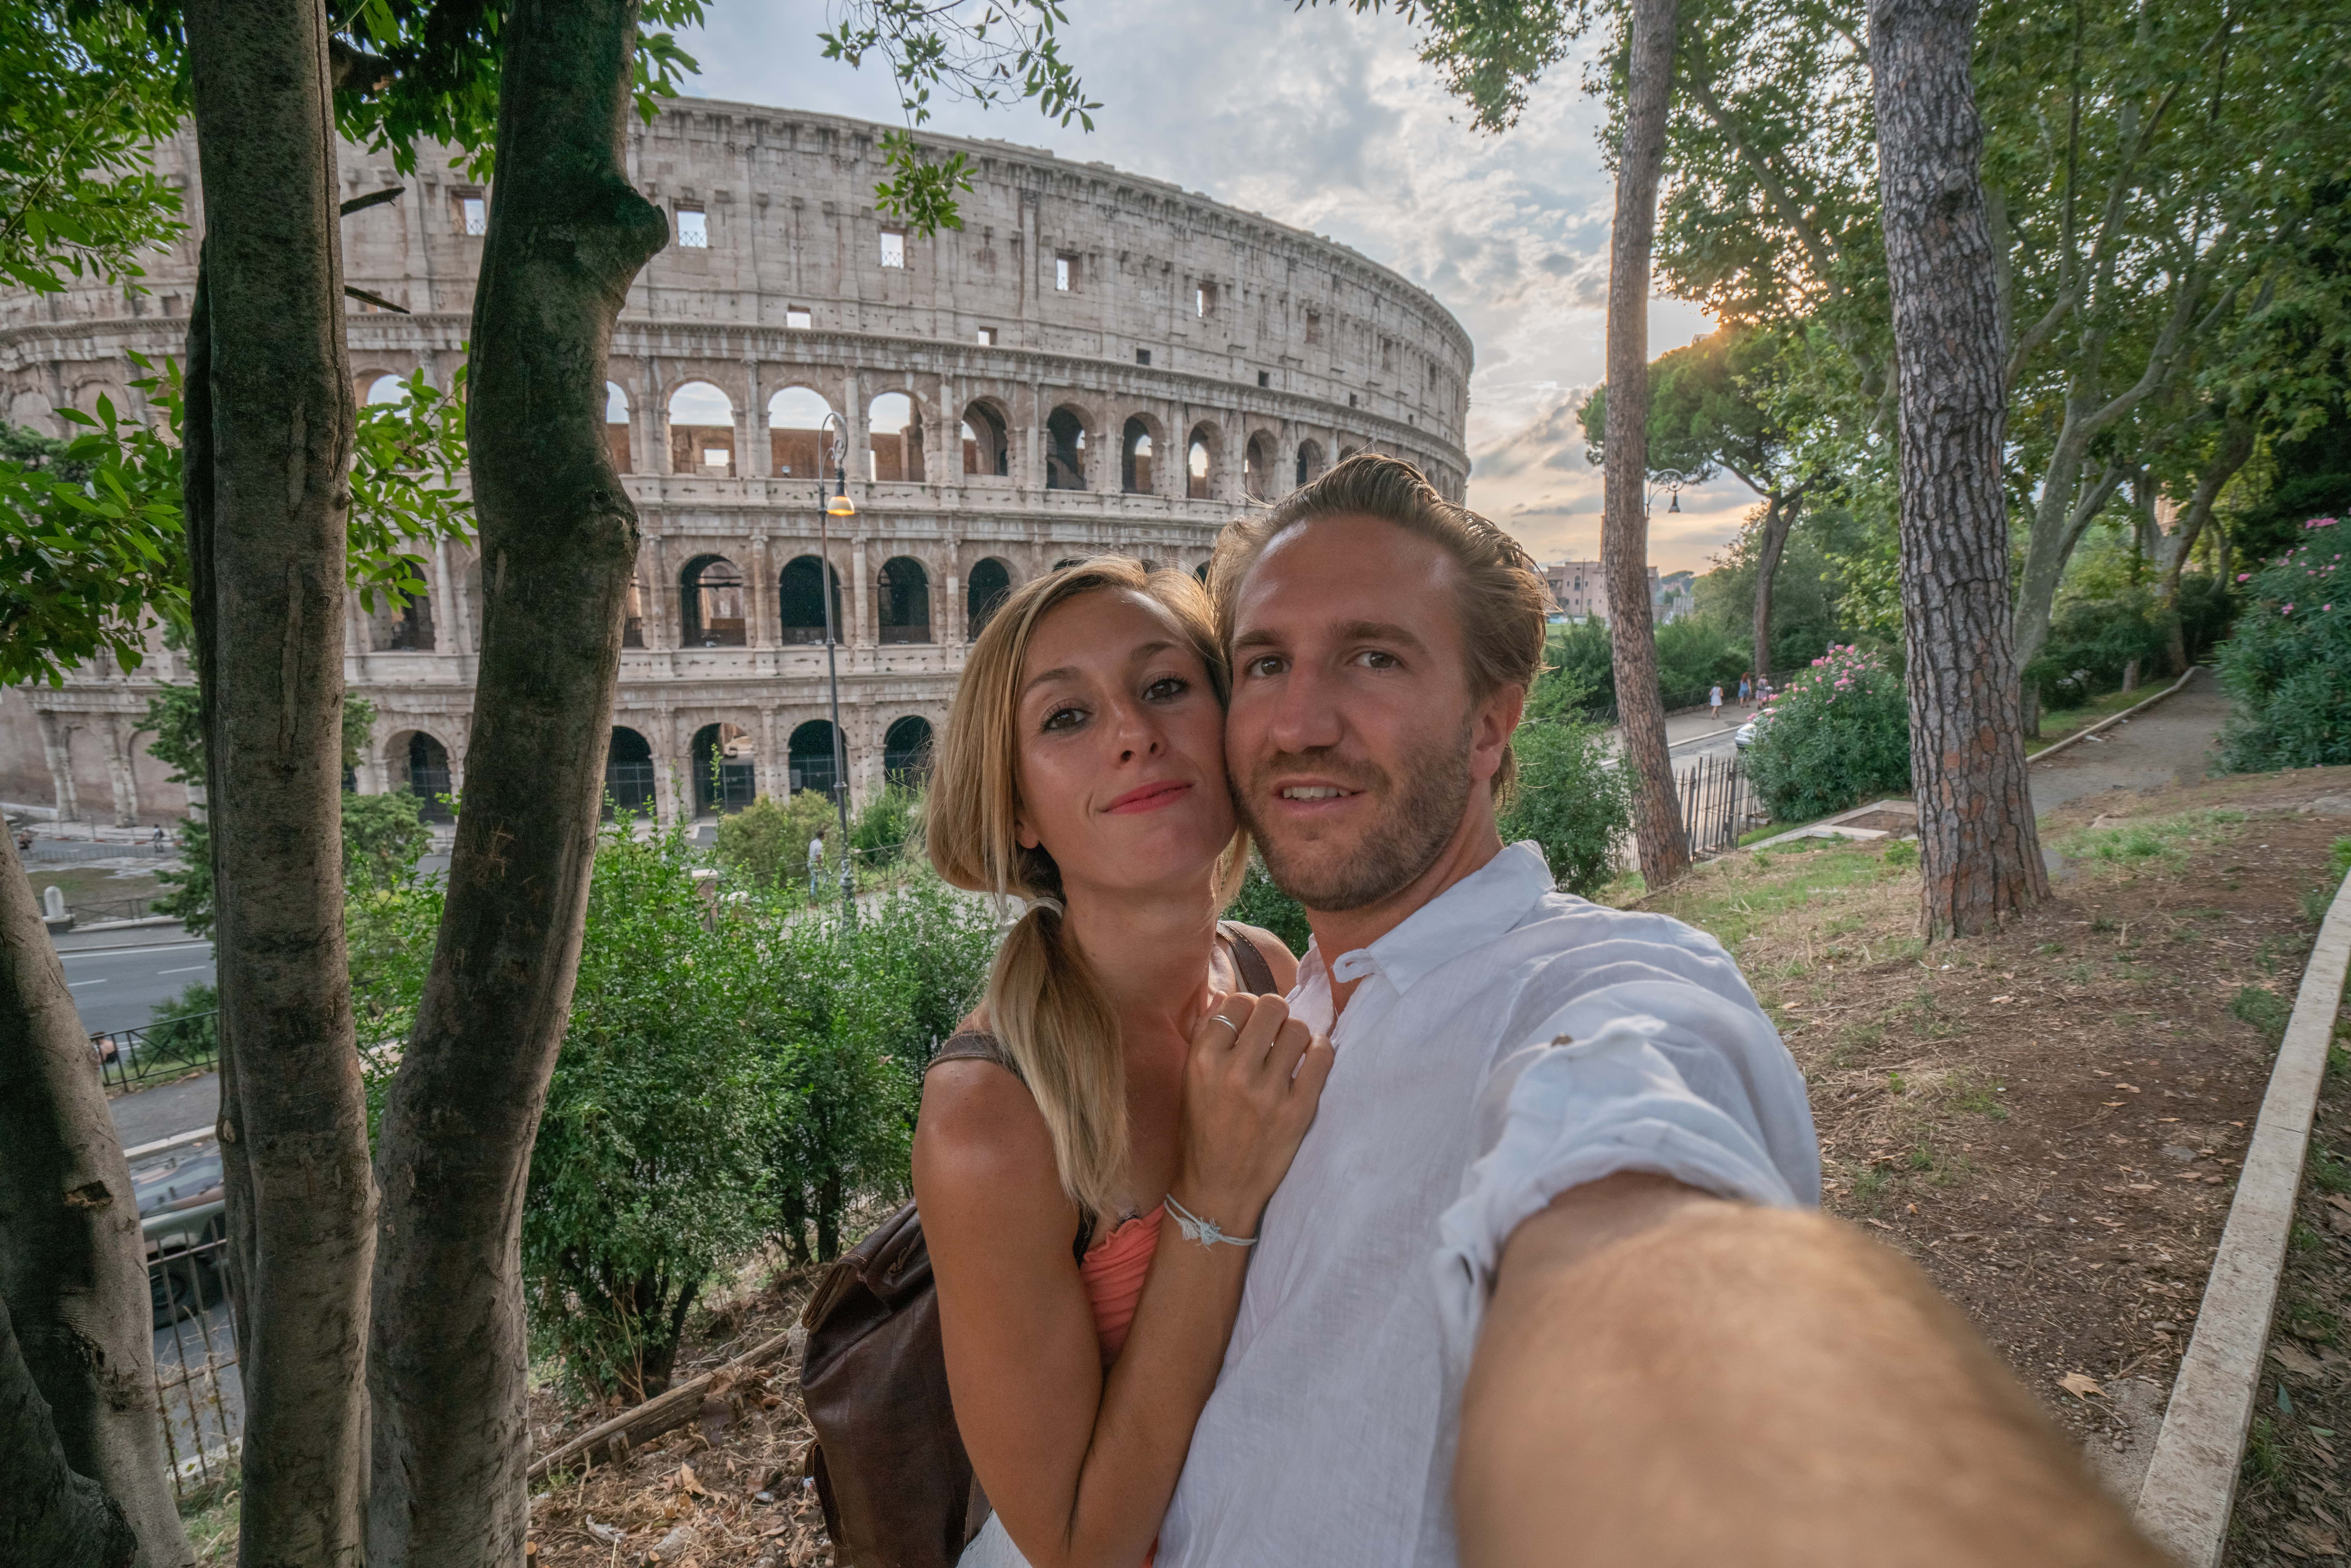 A couple posing for a selfie in front of the Colosseum in Rome | Source: Getty Images